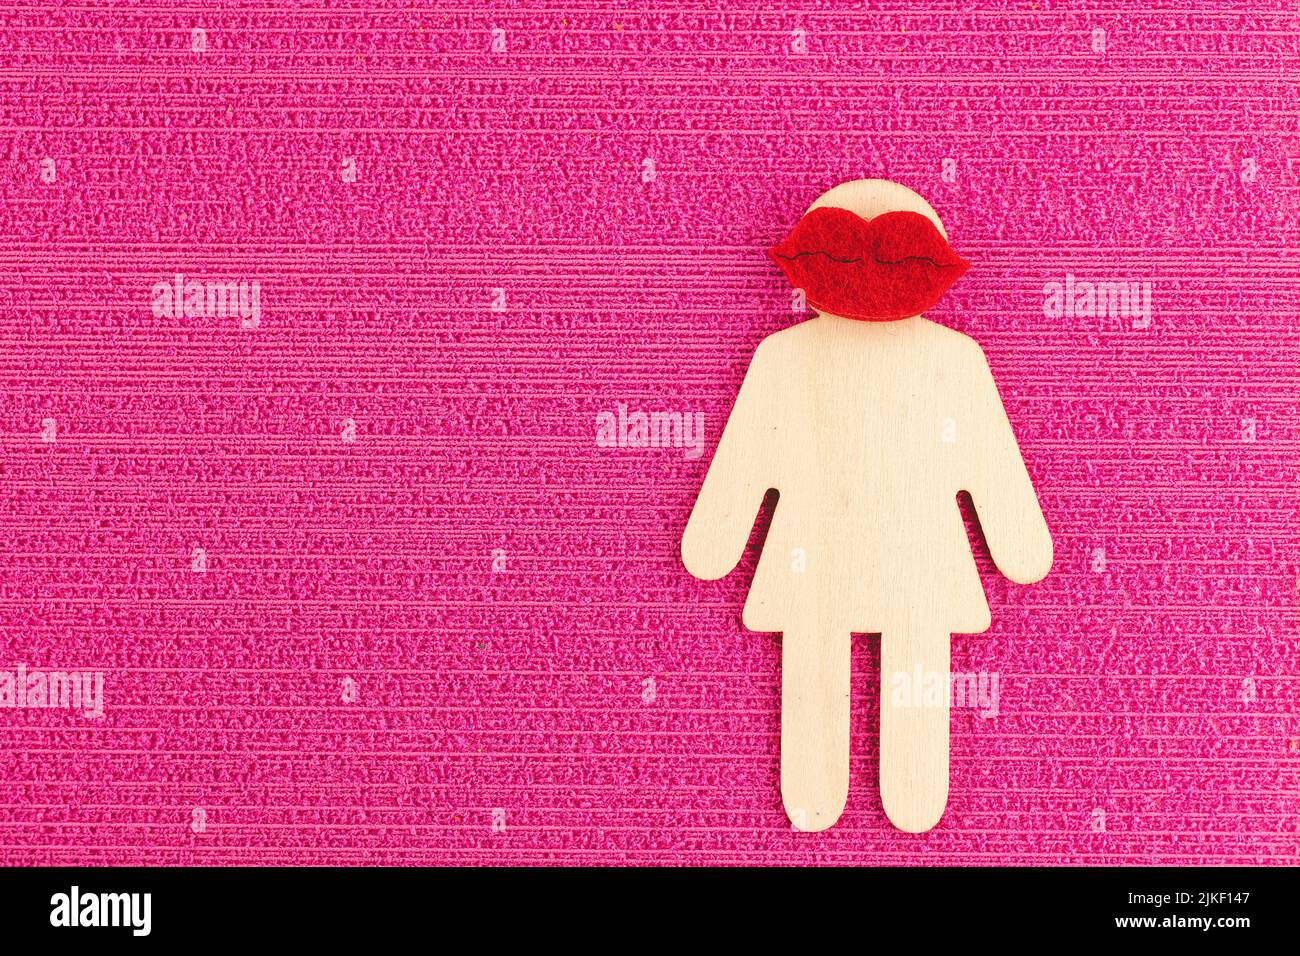 Female sign on a pink background Stock Photo